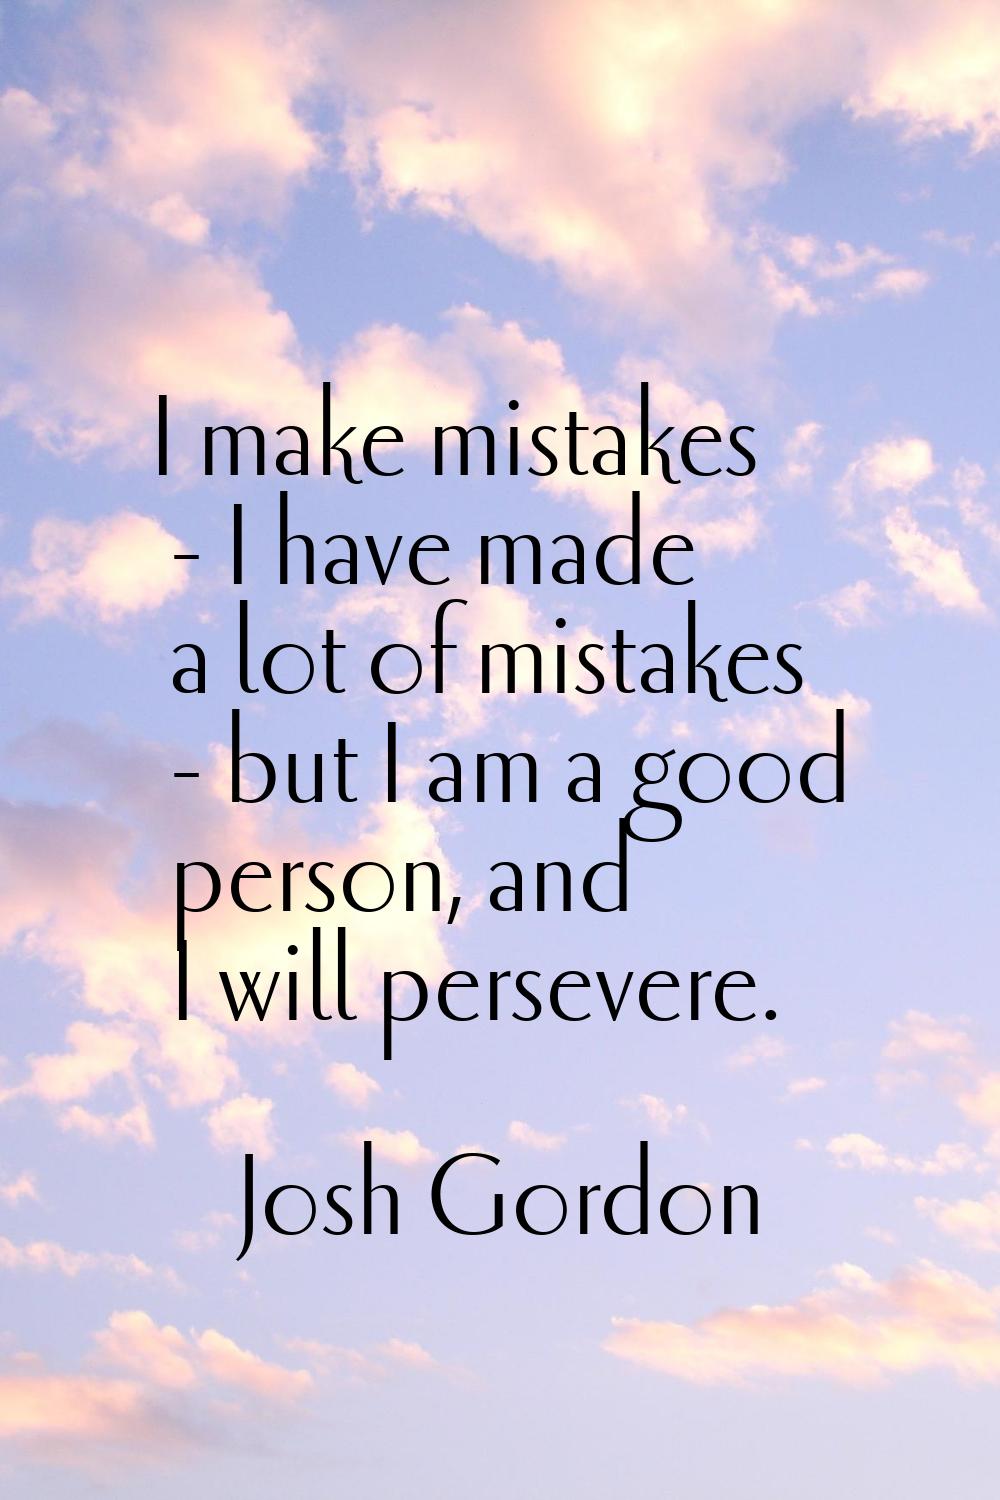 I make mistakes - I have made a lot of mistakes - but I am a good person, and I will persevere.